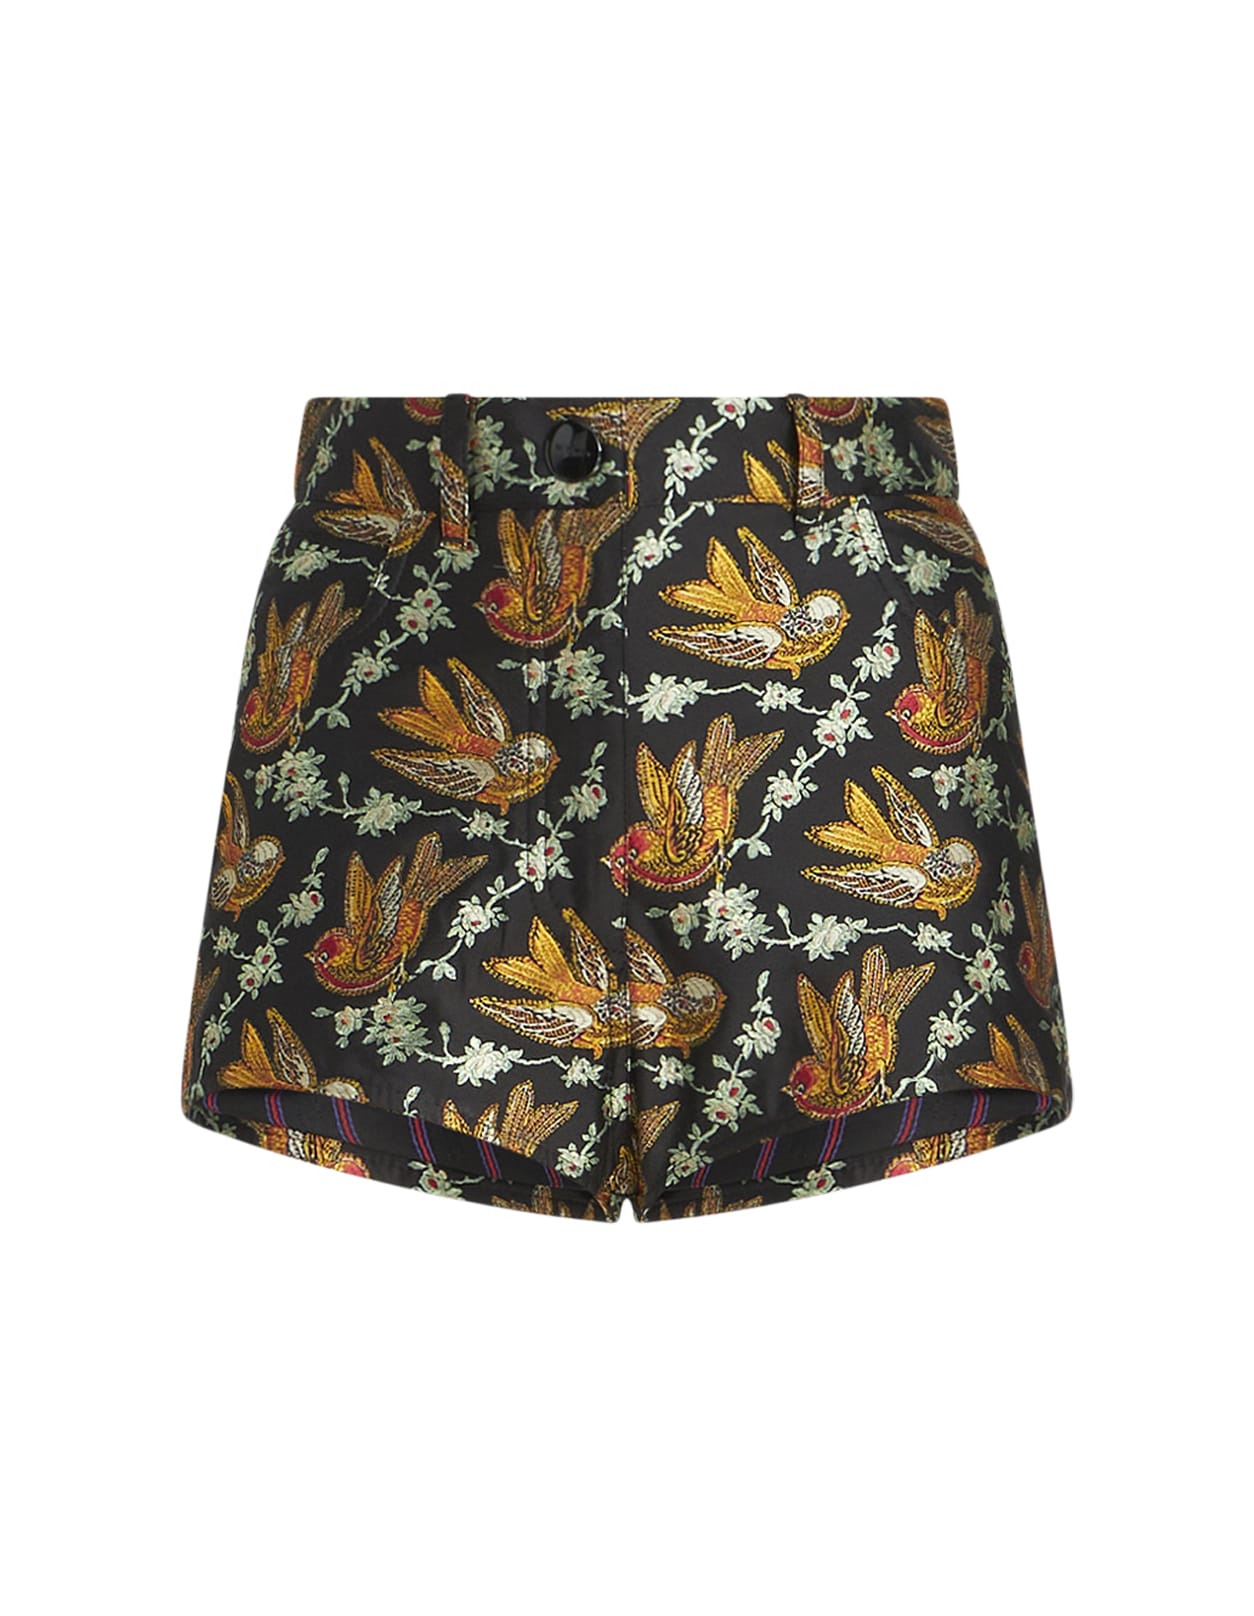 ETRO BLACK JACQUARD SHORTS WITH BIRDS ALL-OVER